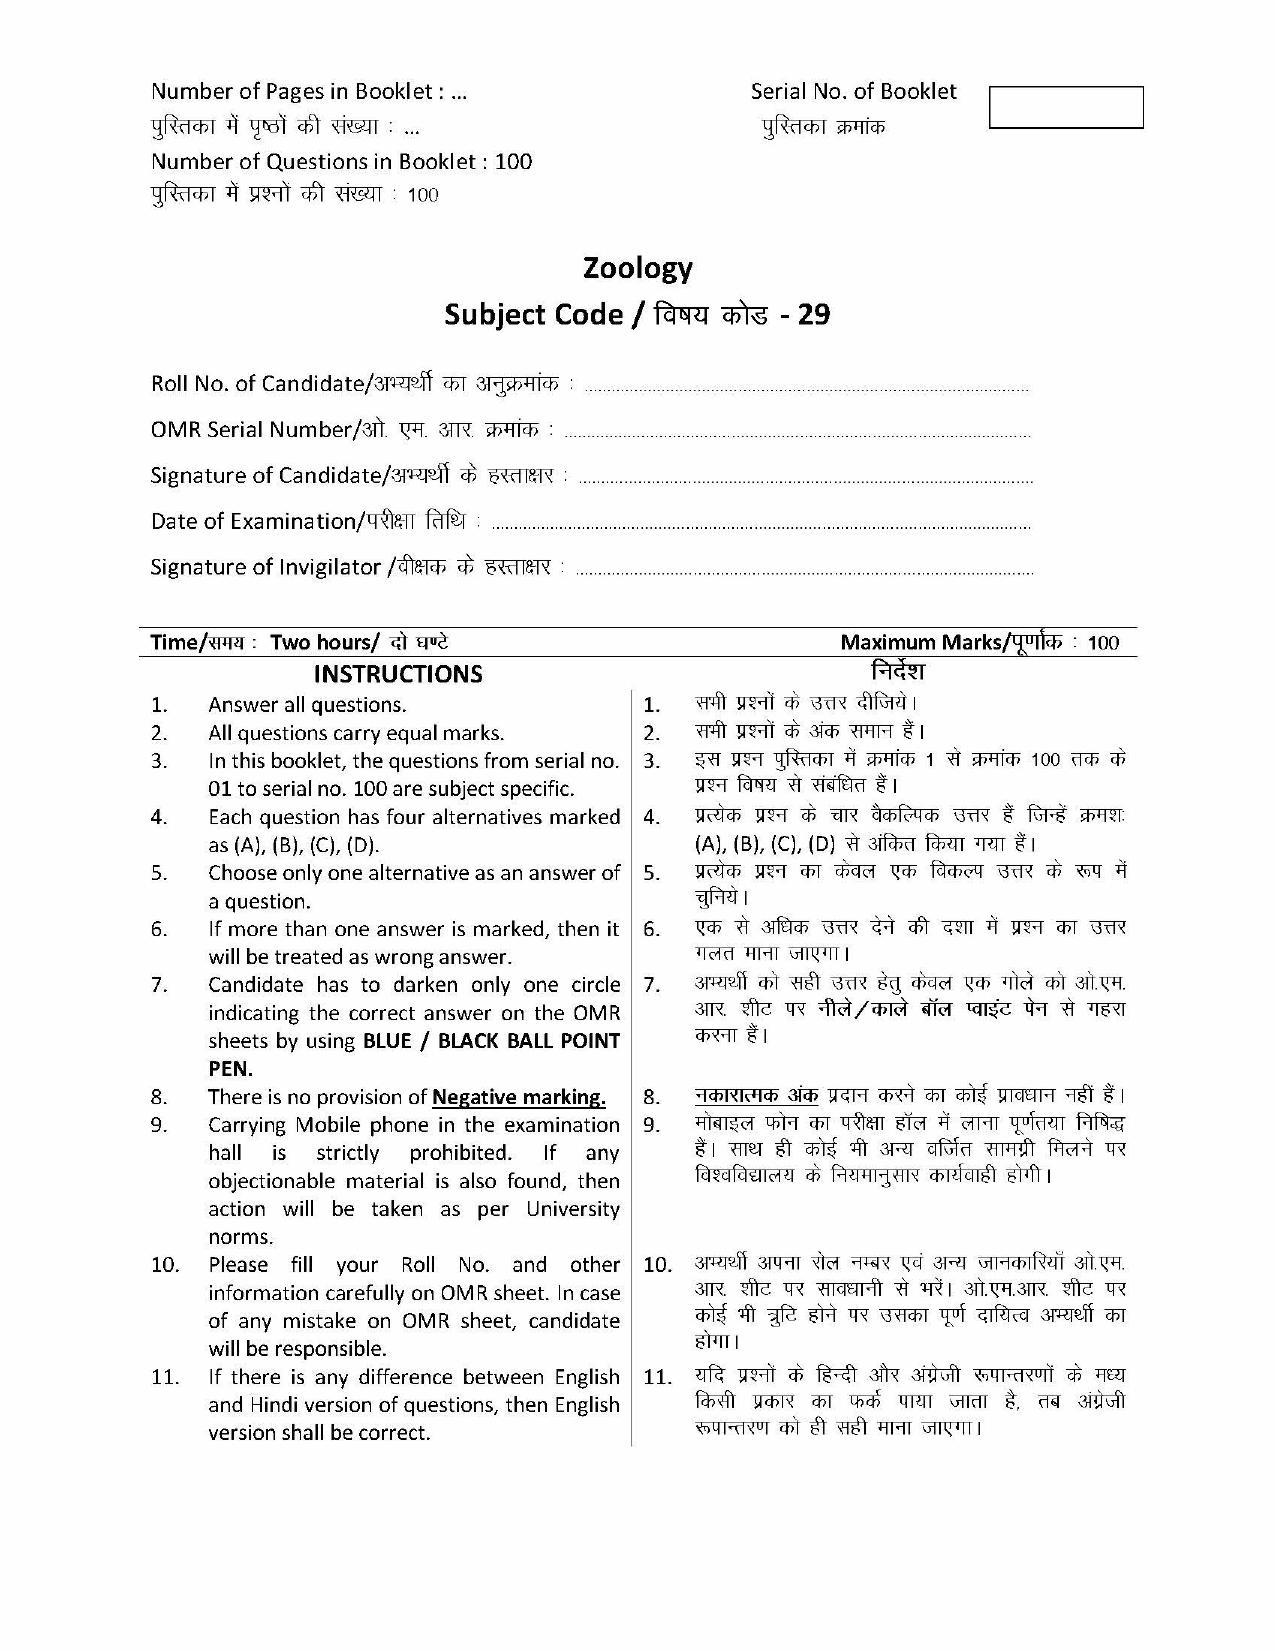 URATPG Zoology Sample Question Paper 2018 - Page 1